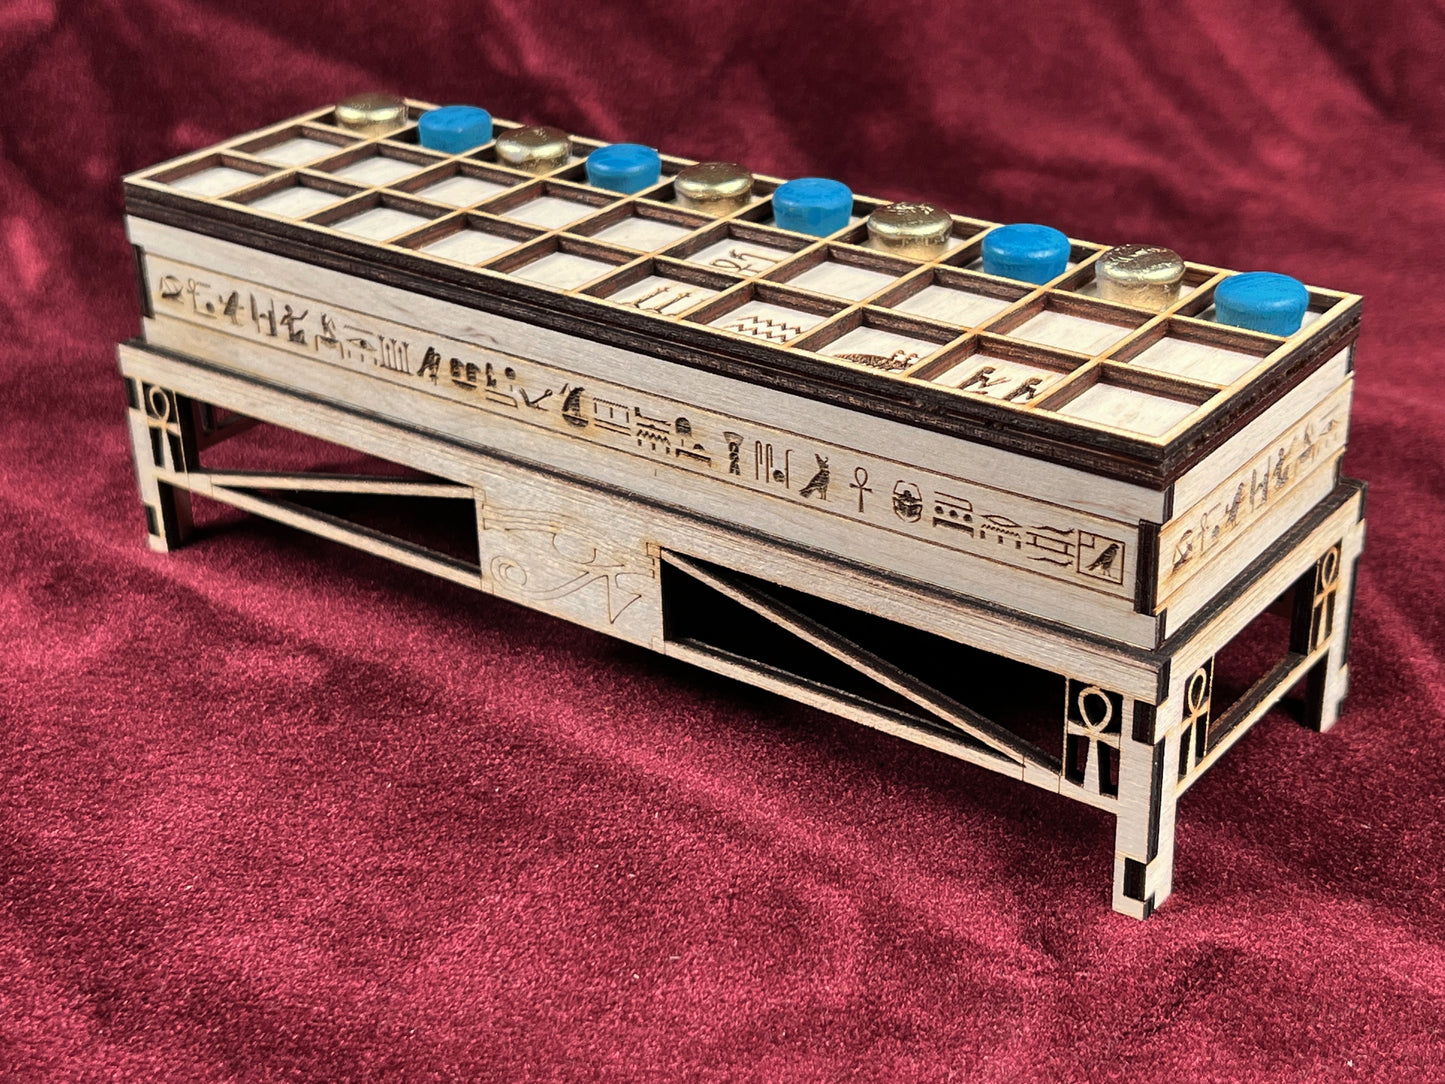 SENET - The Ancient Egyptian Board Game of the Pharaohs.